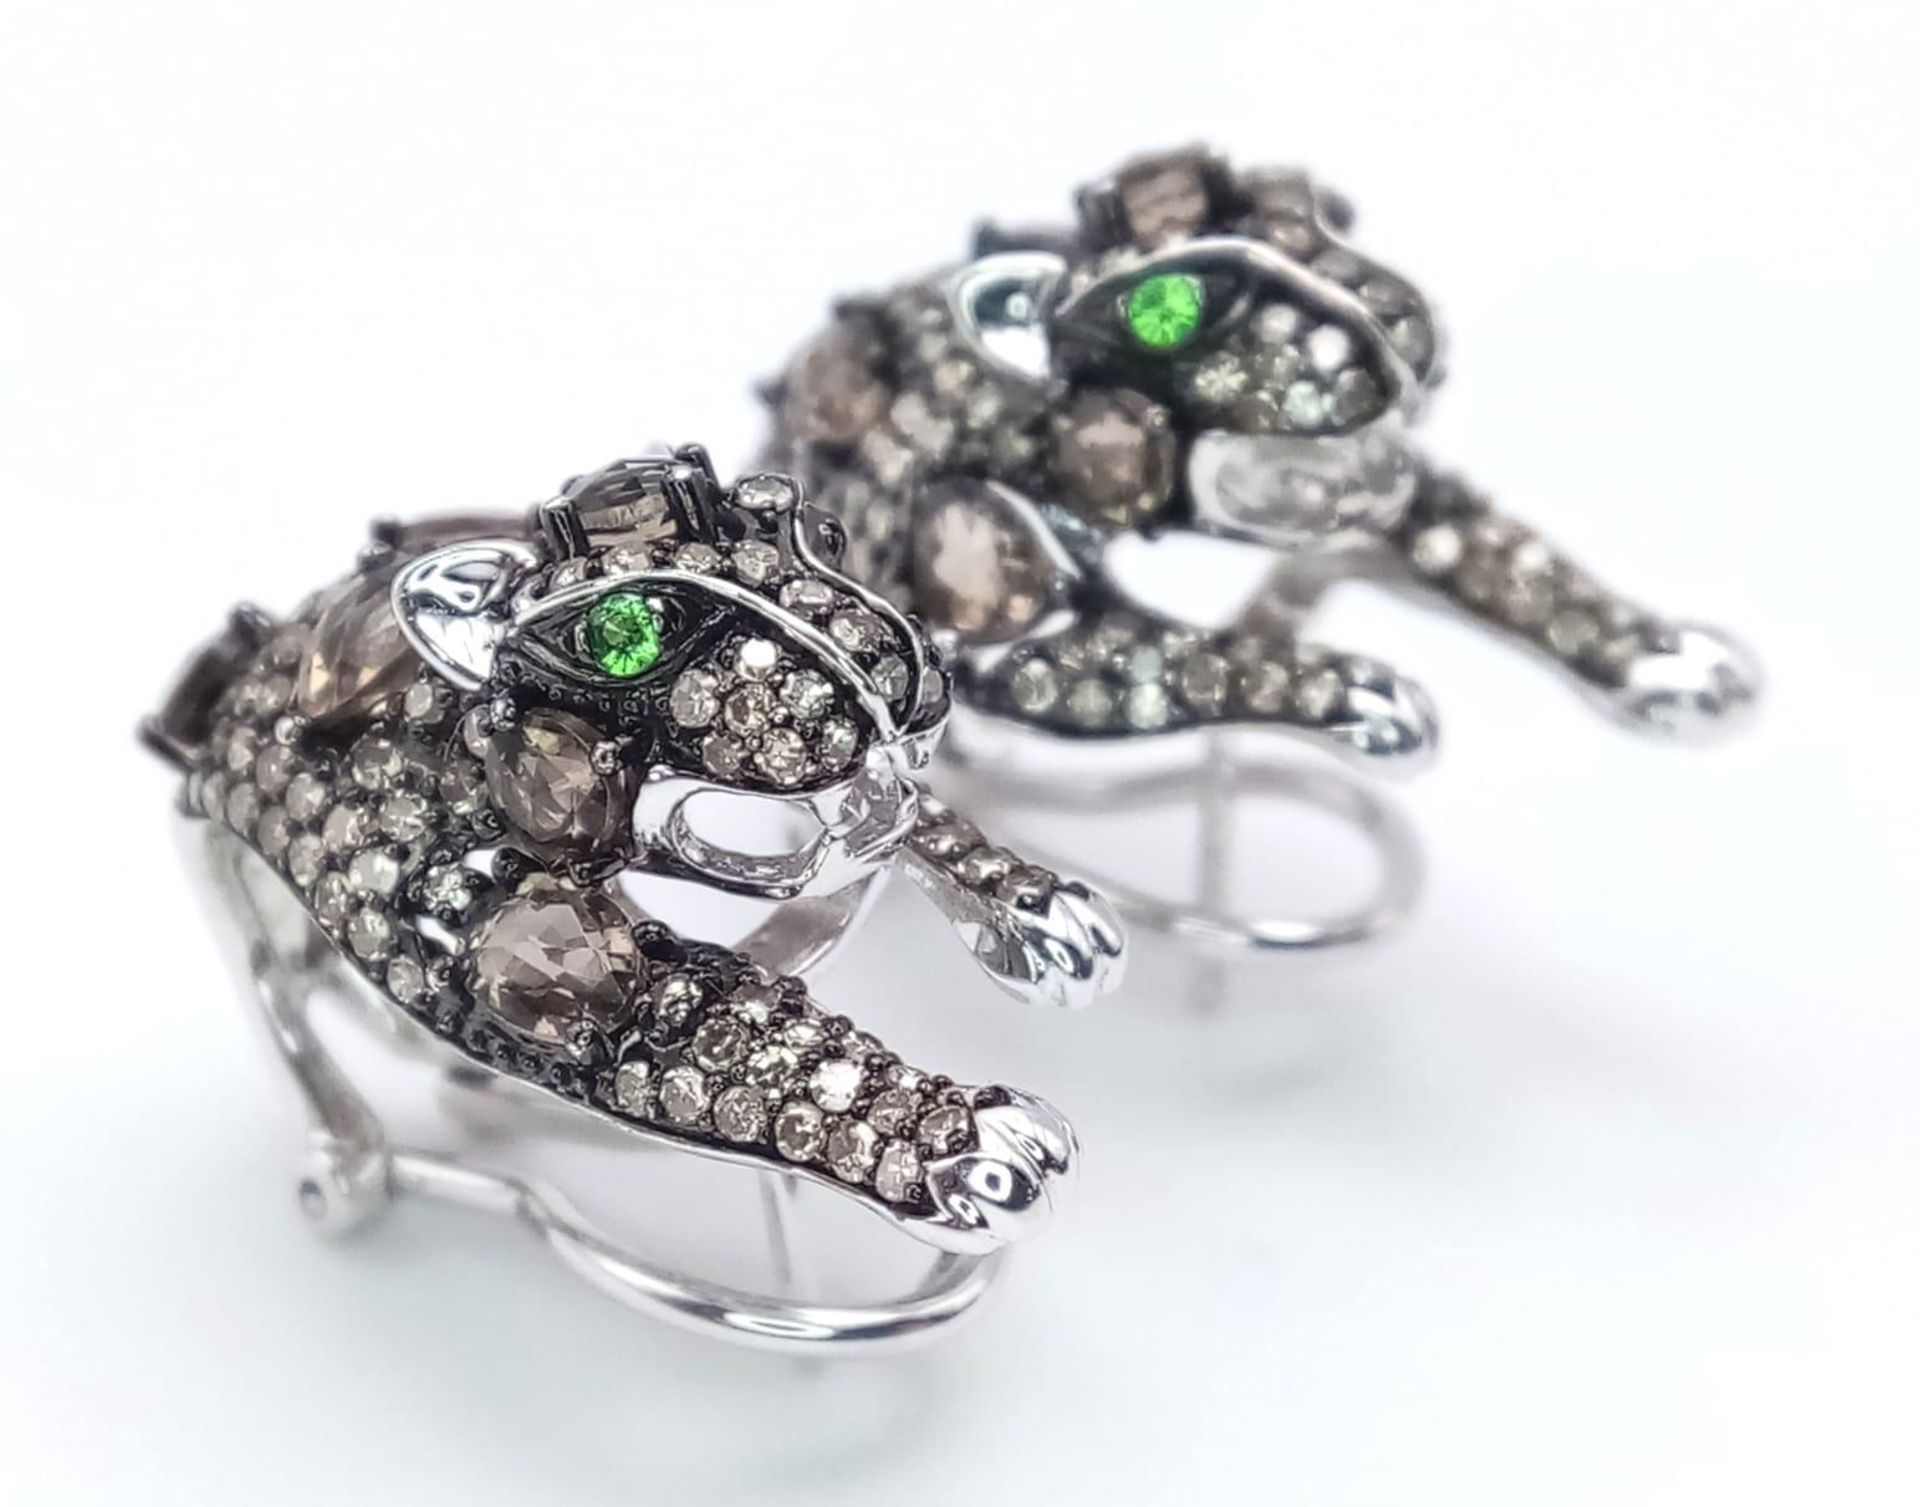 A STUNNING PAIR OF 14K WHITE GOLD DIAMOND , CHAMPAGNE DIAMONDS AND EMERALD PANTHER EARRINGS. 10.5gms